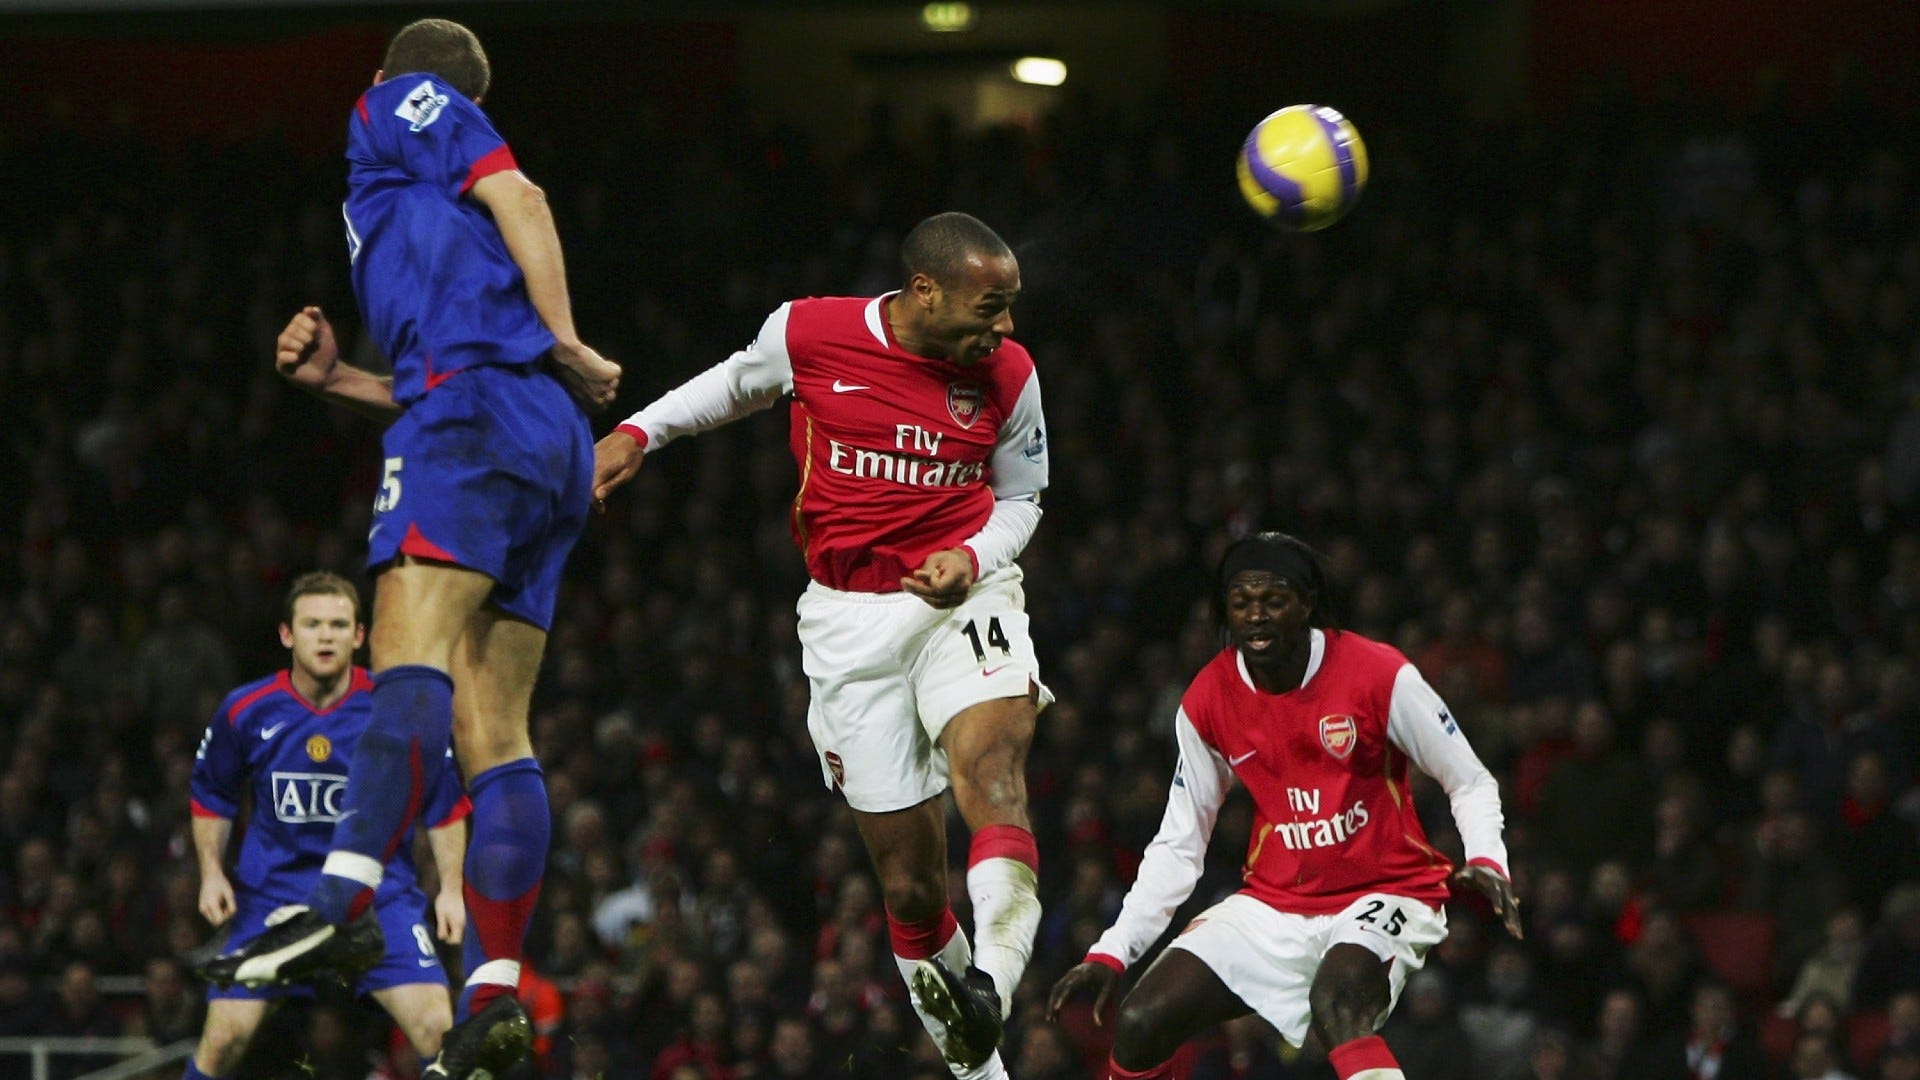 Thierry Henry Arsenal Manchester United 2007